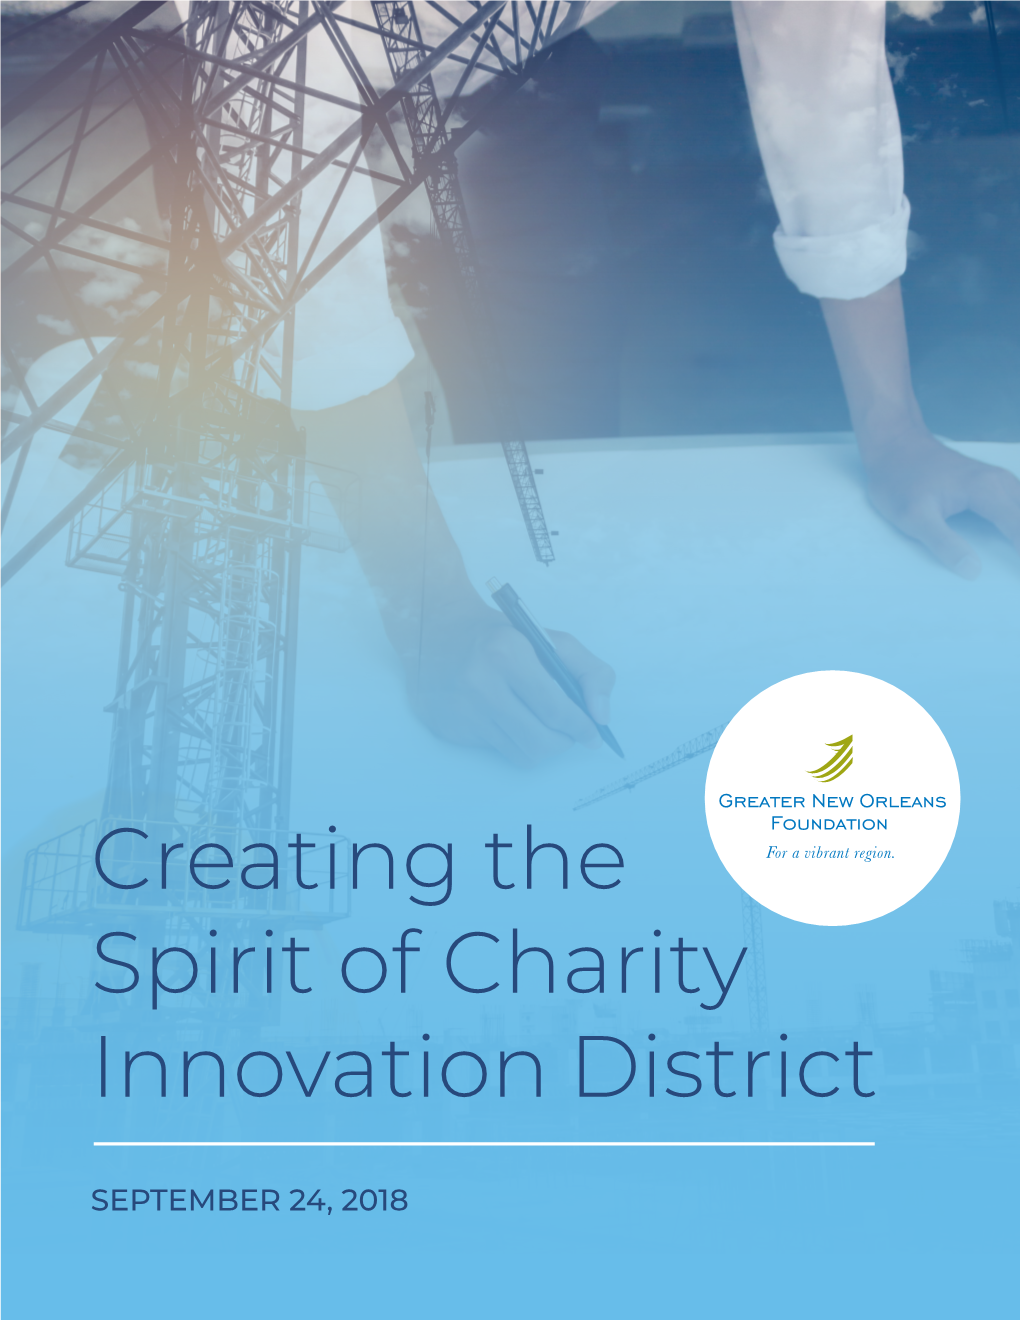 Creating the Spirit of Charity Innovation District